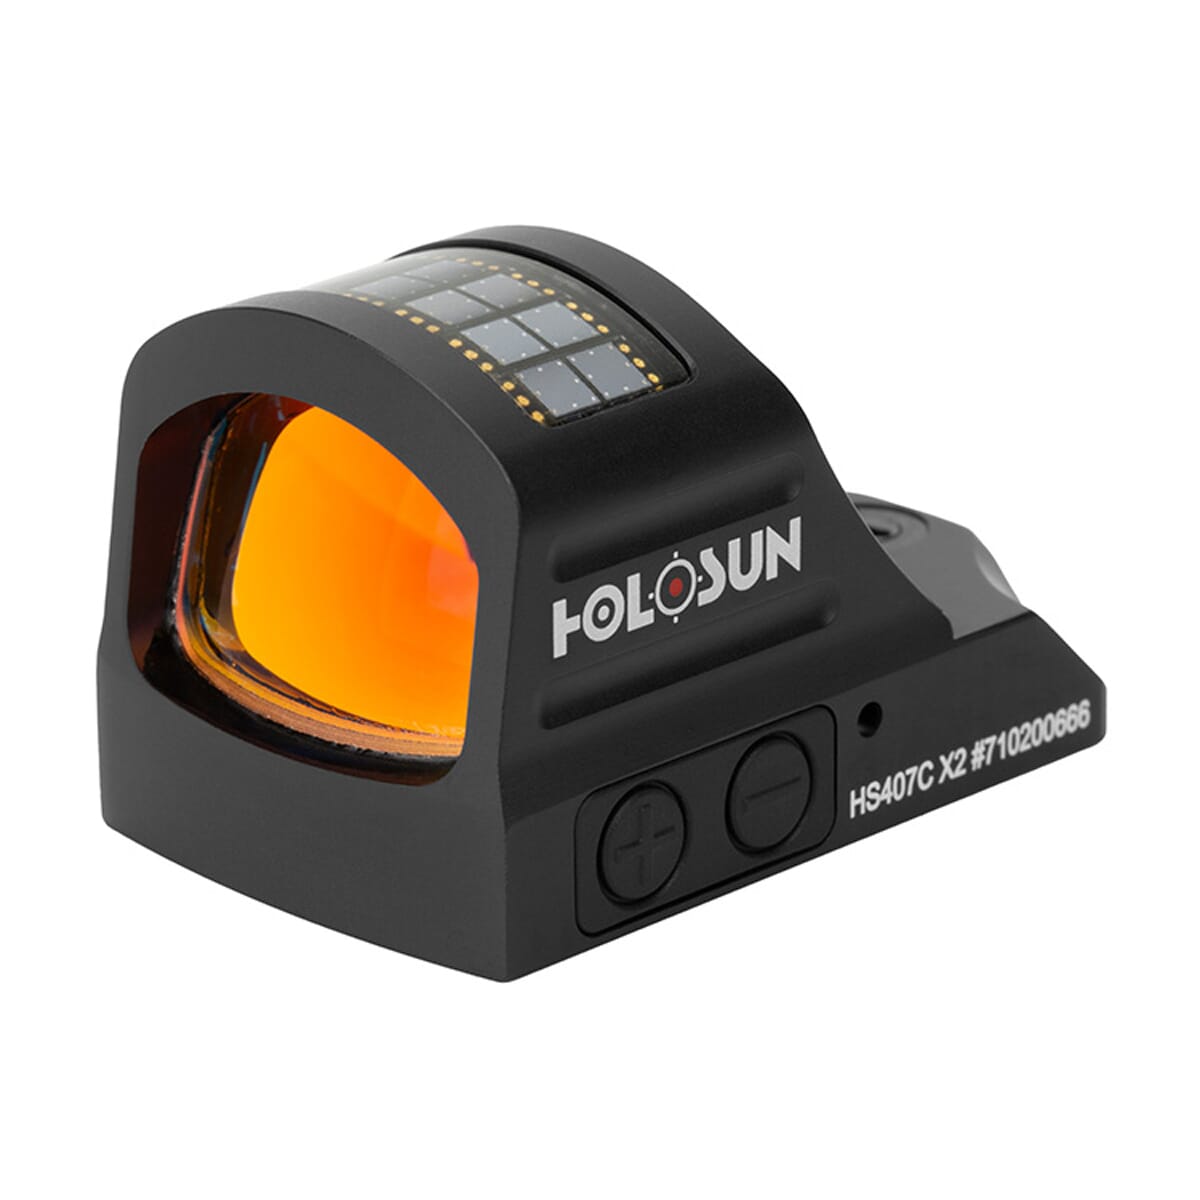 Holosun HS407C-X2 2MOA Dot Only Open Reflex Sight with Solar Failsafe and Shake Awake HS407C-X2